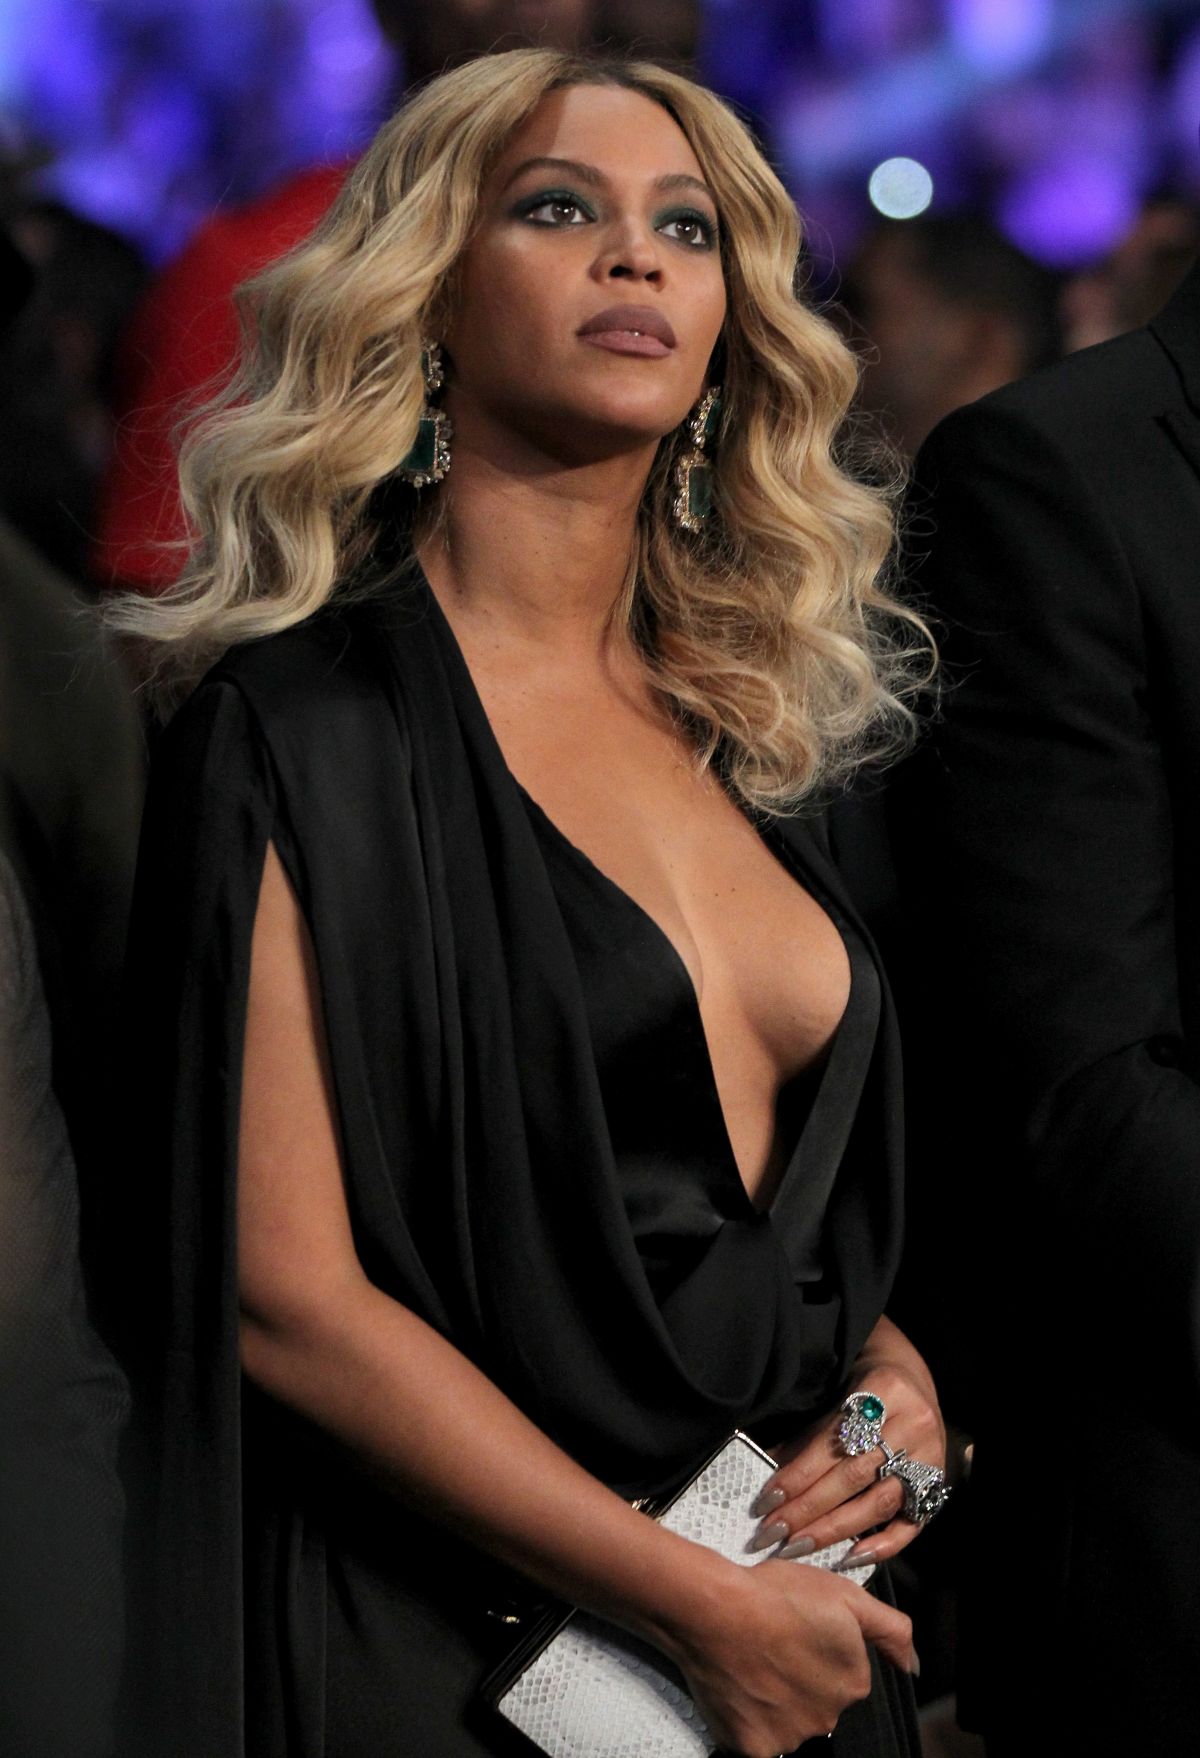 beyonce-at-cotto-vs-canelo-fight-in-las-vegas-11-21-2015_13.jpg